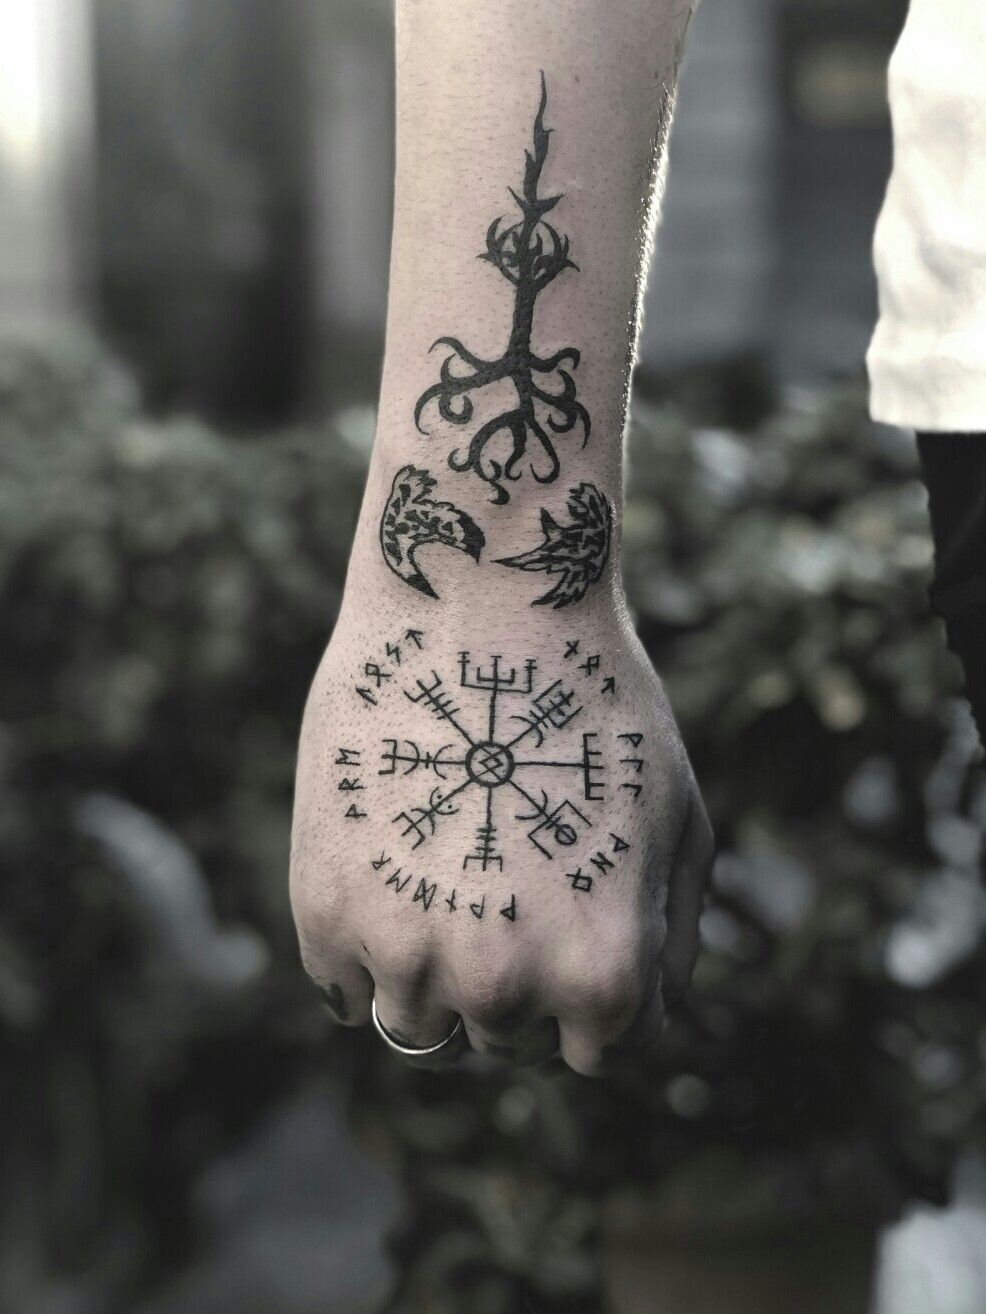 Need help with a tattoo  is there anything Norse about this What did  the runes mean in the circle and under the circle I know the compass  isnt Norse but made